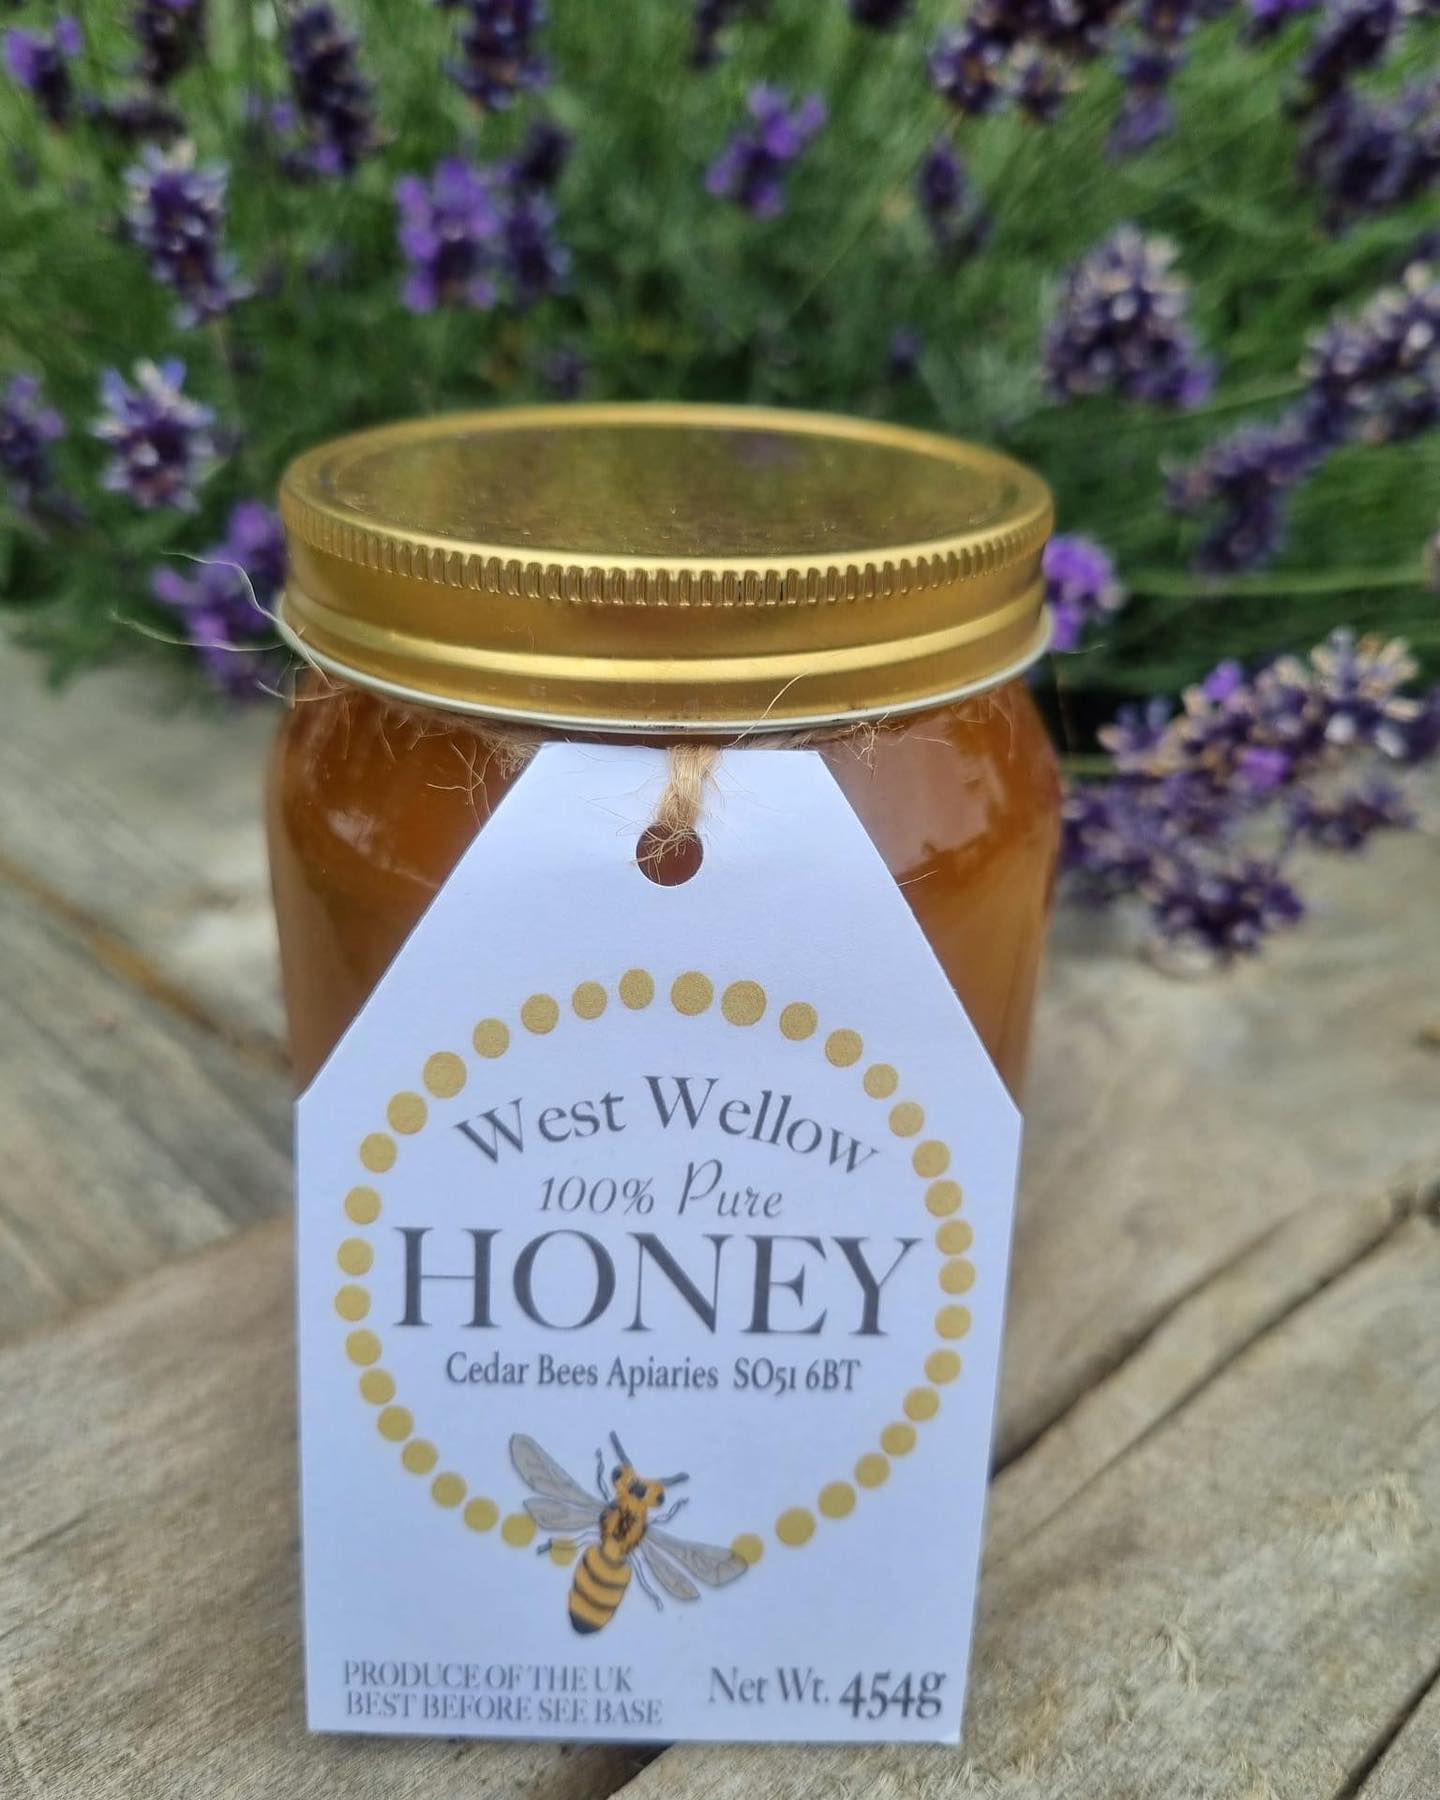 #suppliershoutout

We are very excited to be supplying Cedar Bee Honey. 

This honey has such a lovely story behind it, when you call Cedar Bees to collect bees who have taken up residence in your home and garden, they will collect the bees and take them back to their hives where the honey is produced, collected and then bottled for locals to enjoy! 

Honey not only tastes incredible but is also a good source of antioxidants, has antibacterial properties, helps with digestive issues, helps soother a sore throat and wounds! 

#cedarbees #localhoney #headlandsfarmcoffeeshop #localcoffeeshop #coffeeshopinromsey #localproduce #availablenow #busybees #honey #honeybee #localsupplier #honeybees